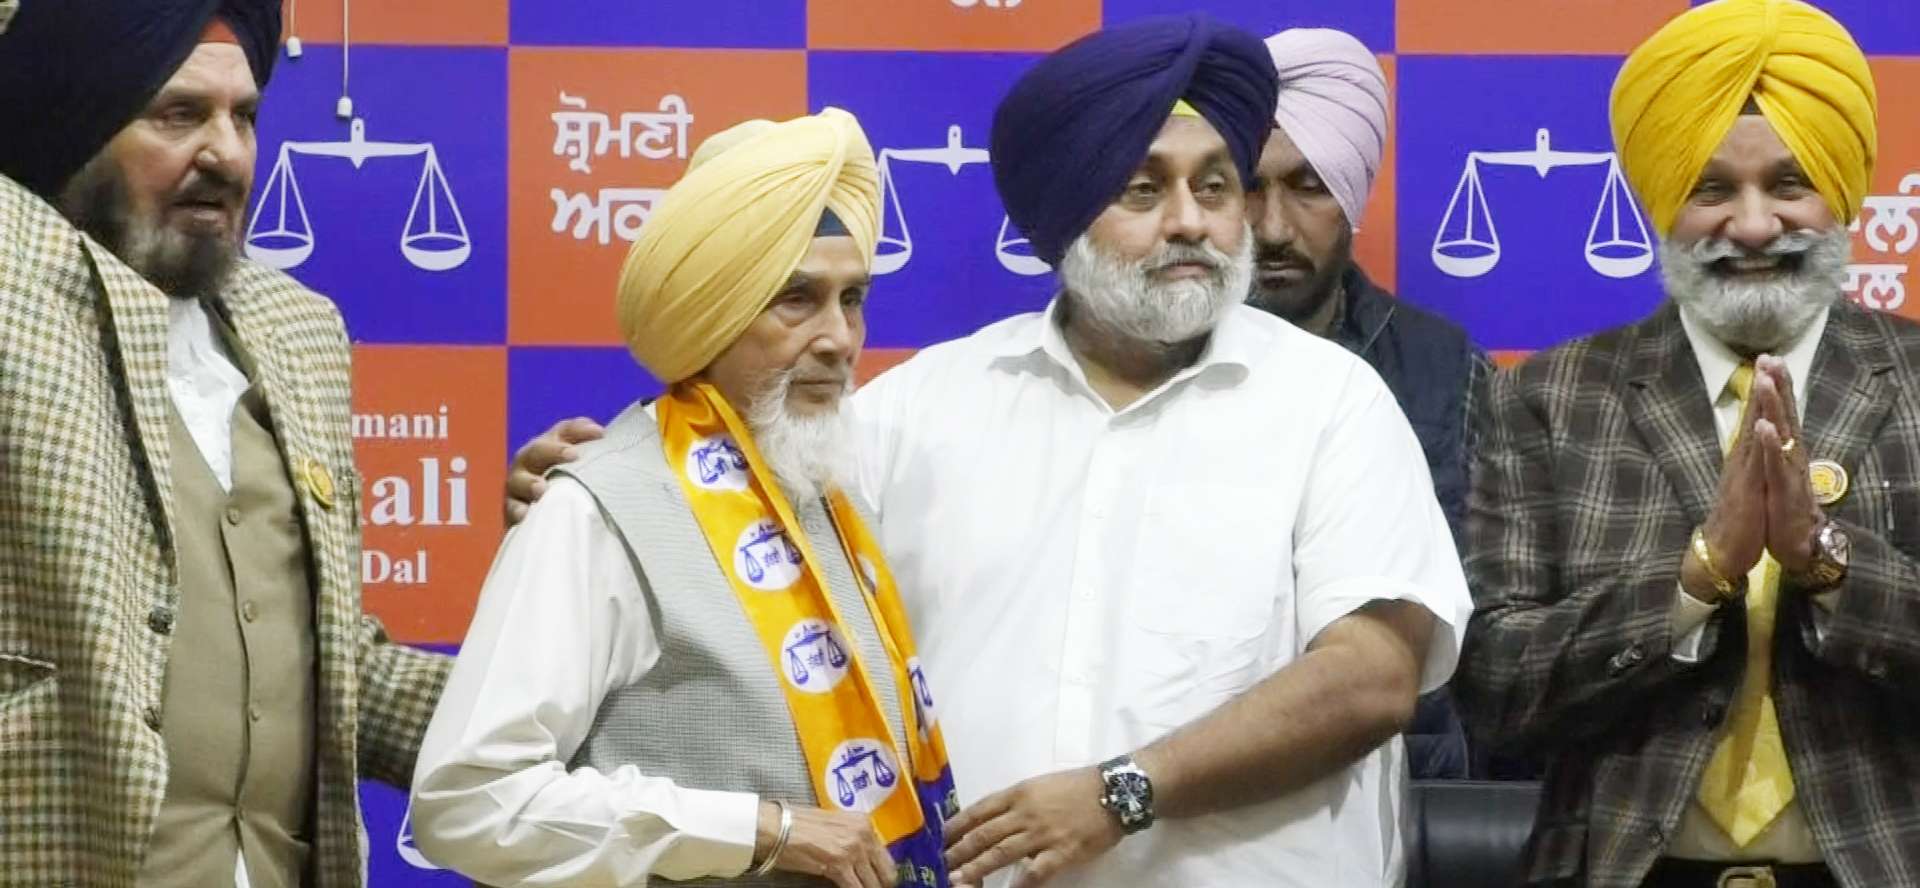 Ceremony Possible Today At Chandigarh Party Office, Talks With Sukhbir Badal Going On For A Long Time